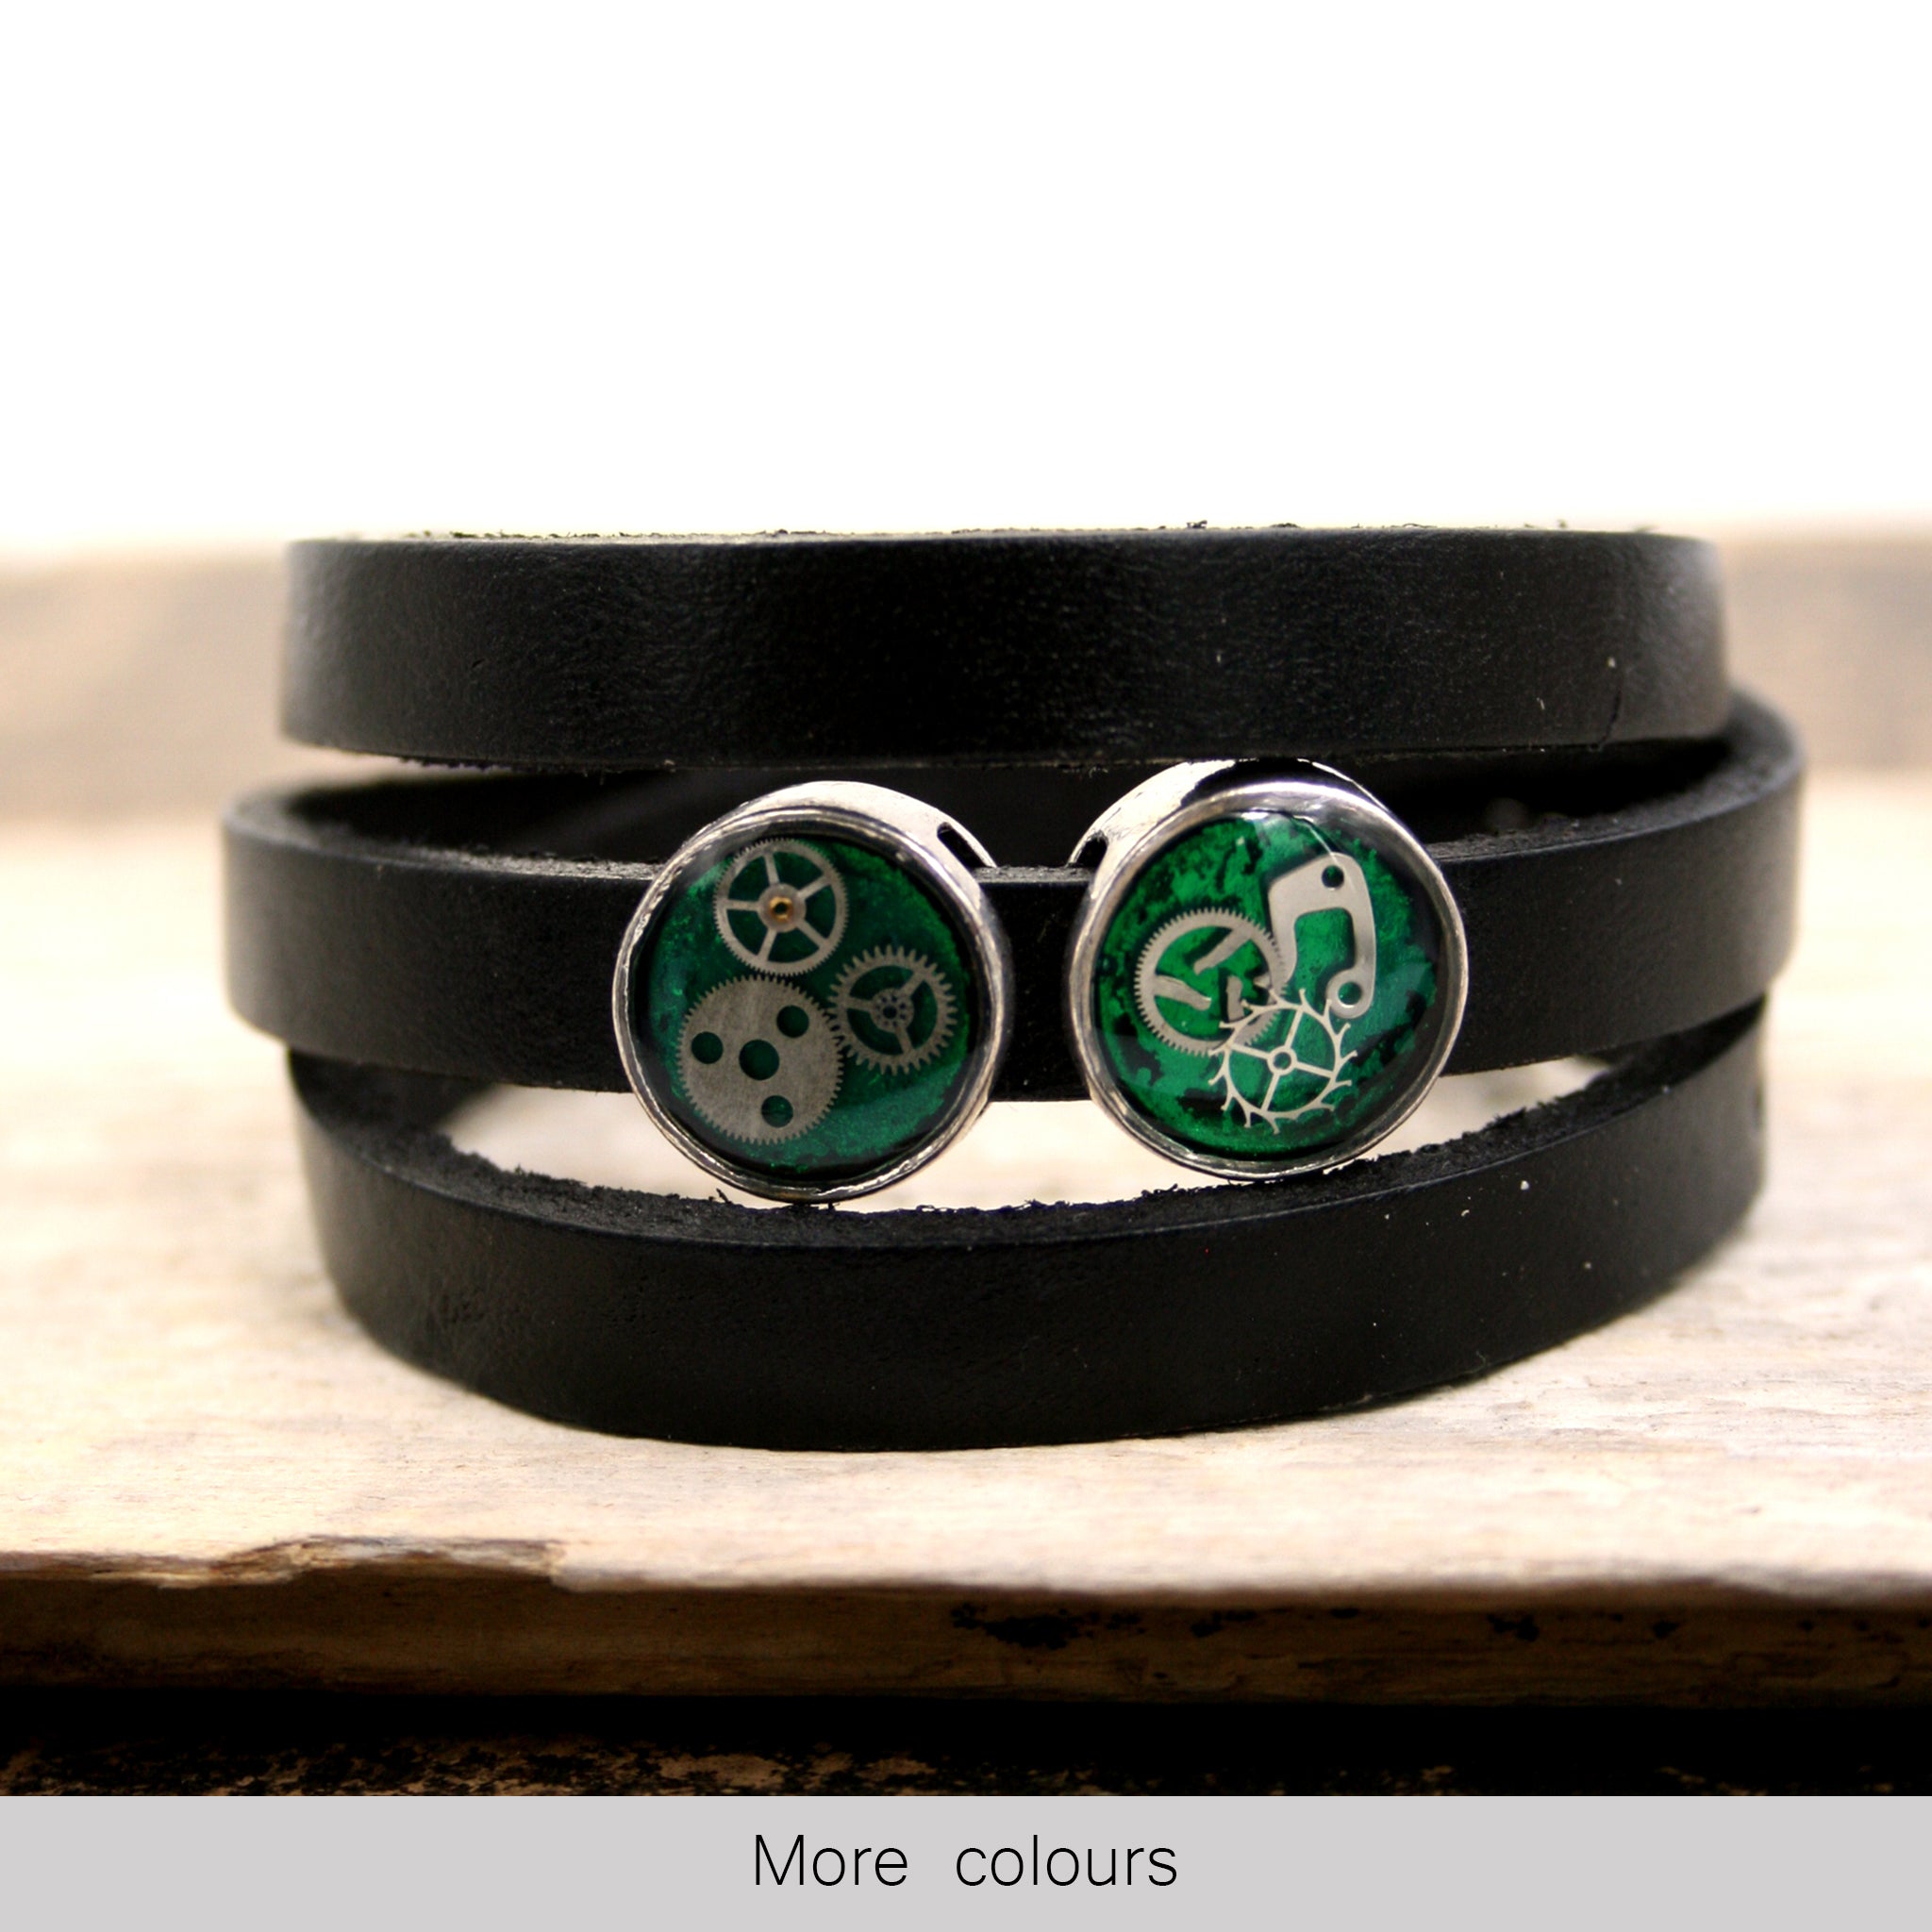 Black leather triple wrap bracelet with green steampunk slider beads with watch parts